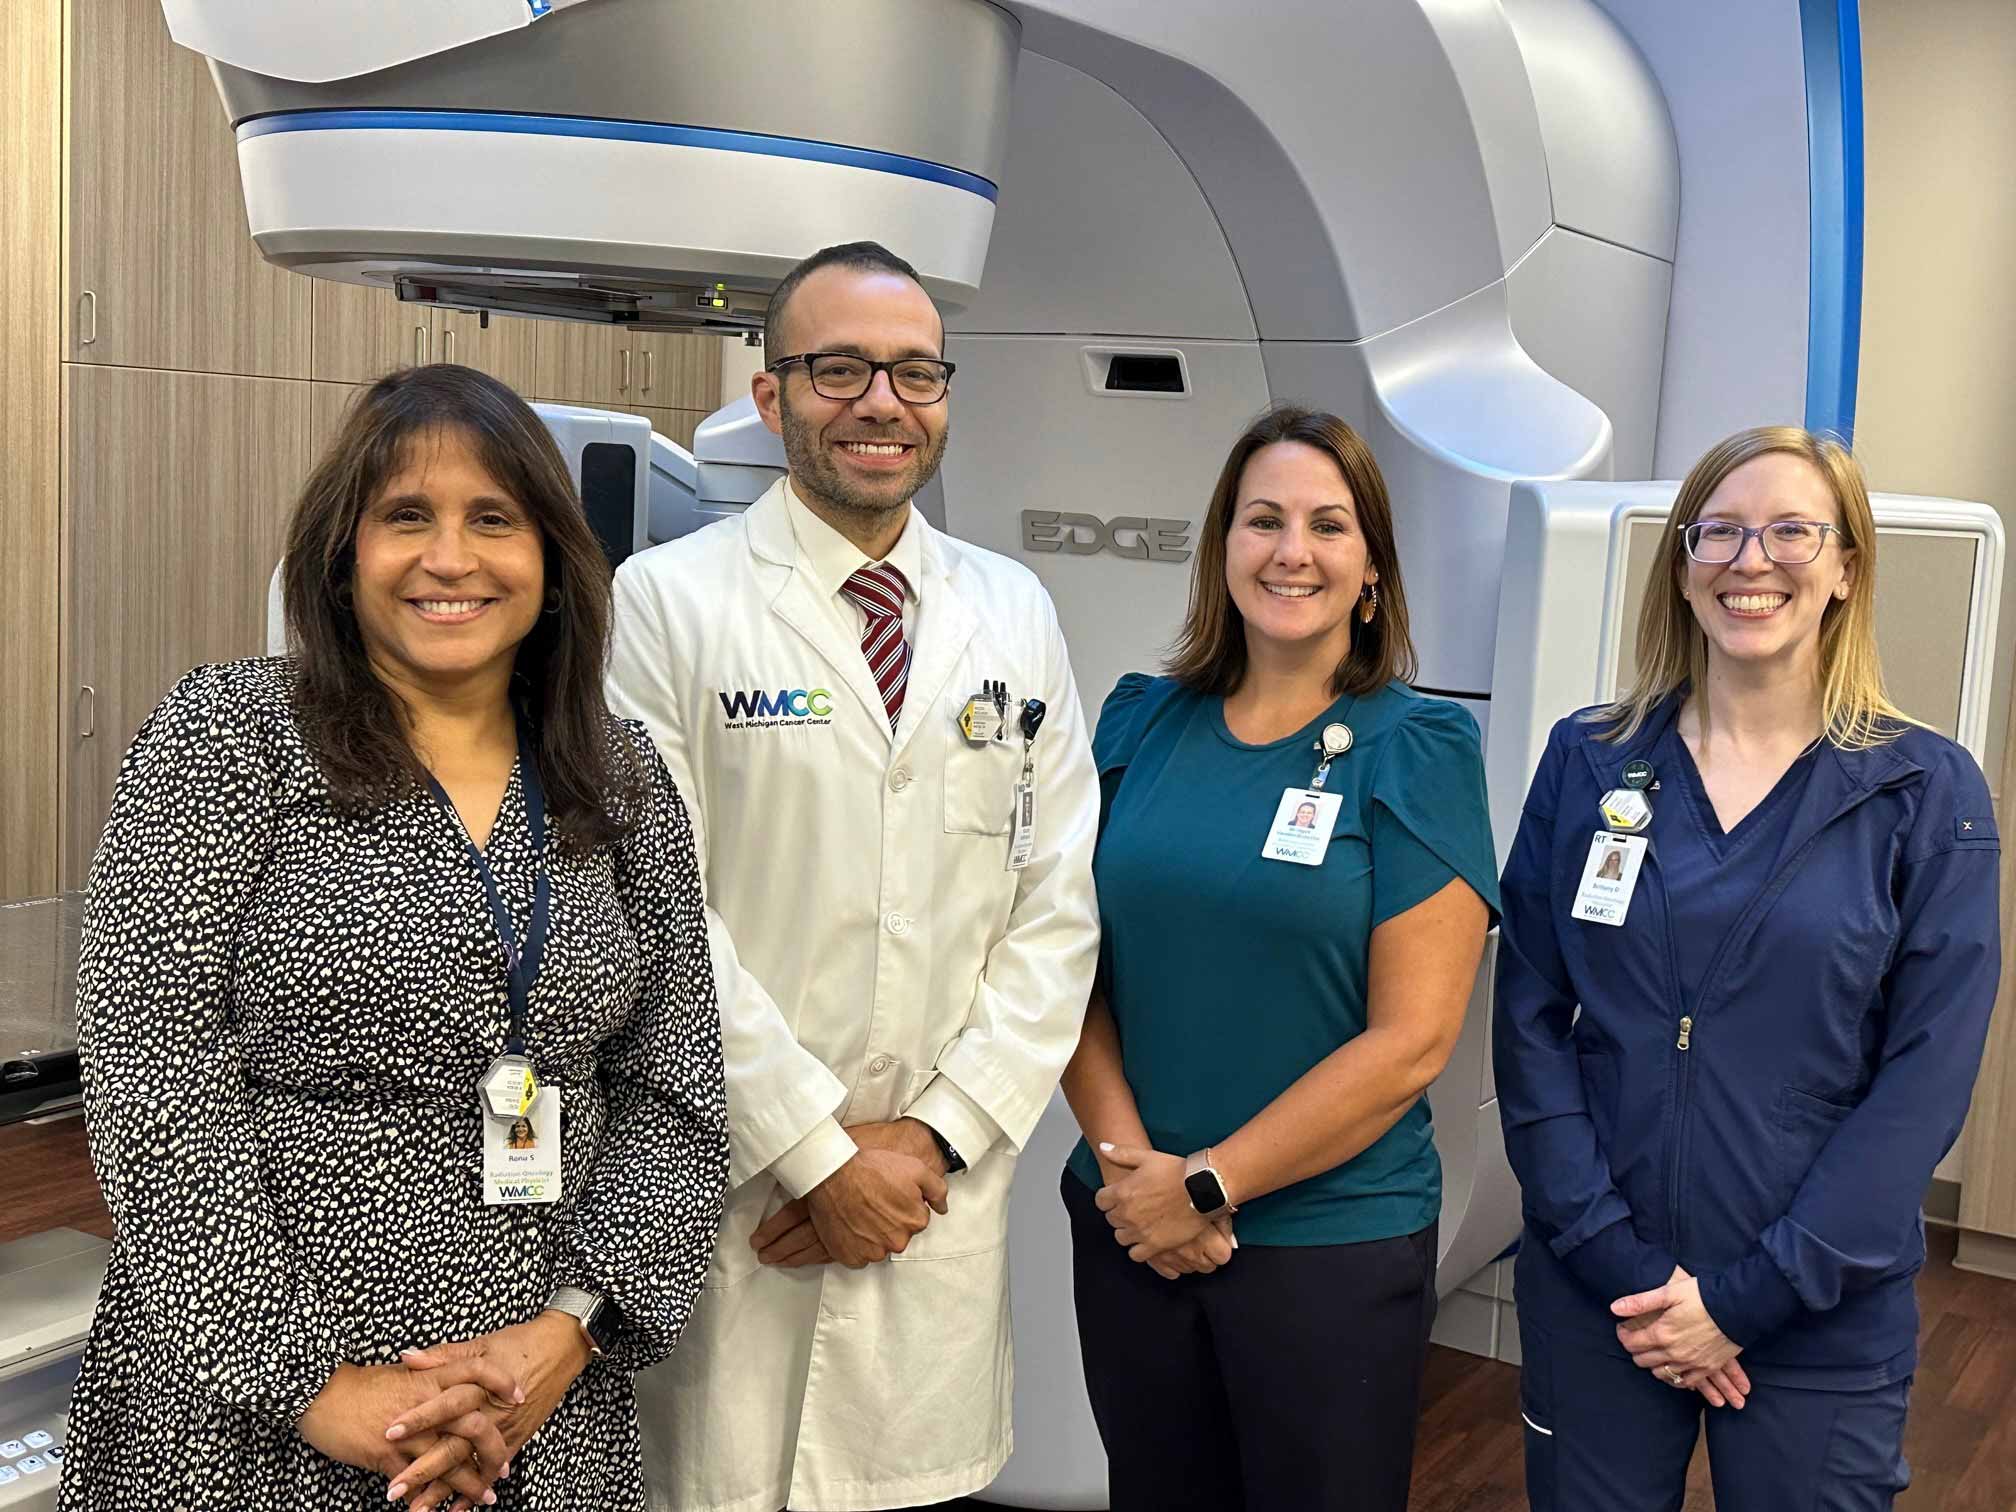 Renu Sharma, MS, Director of Medical Physics, Mazen Mislmani, MD, Division Chief, Radiation Oncology, Bridget VandenBussche, CPHRM, Executive Director and Brittany Dominick, BSRT, Radiation Therapy Manager.